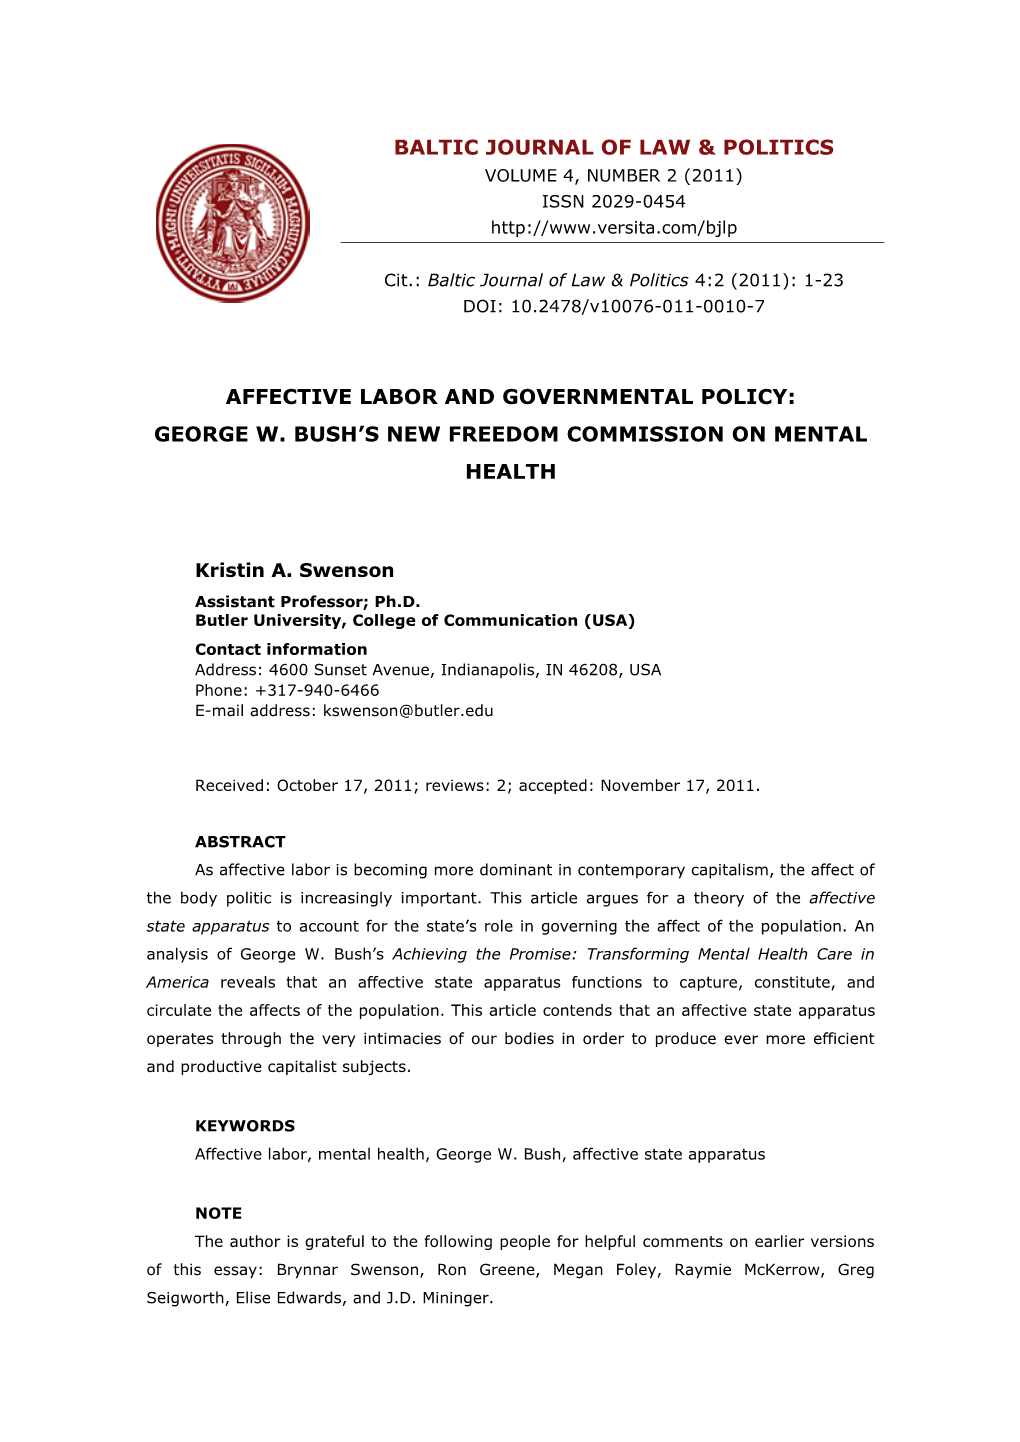 Affective Labor and Governmental Policy: George W